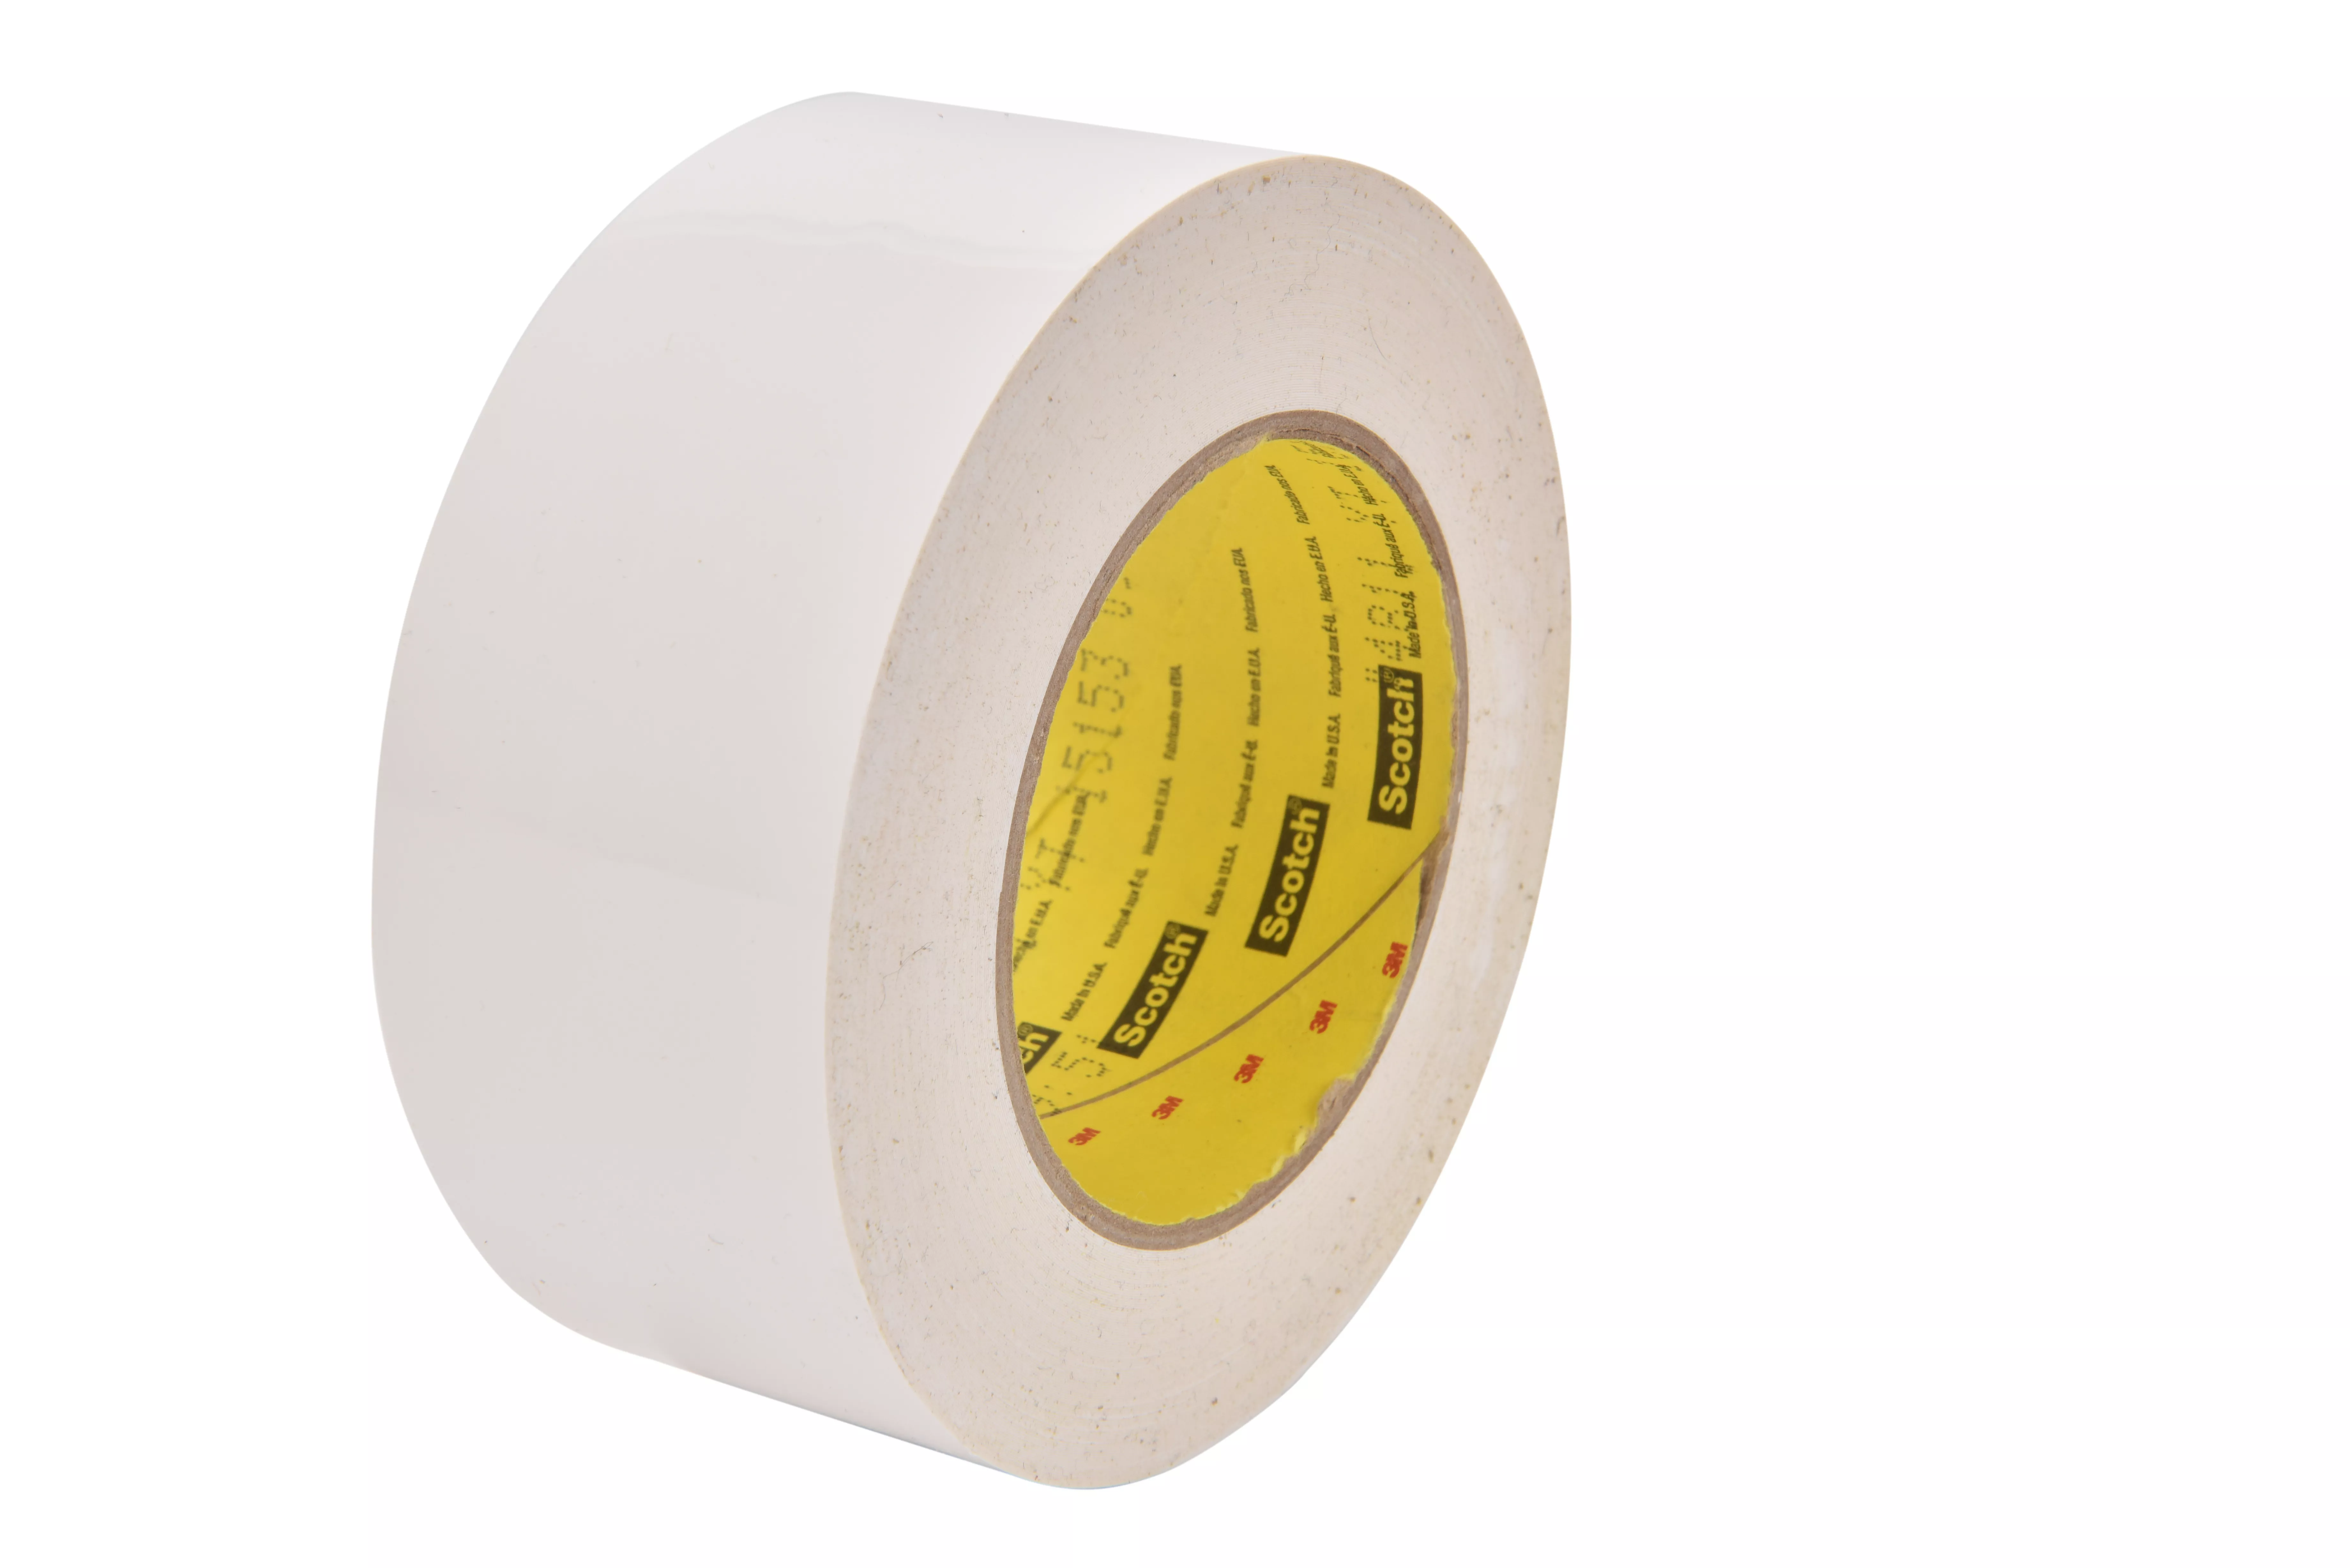 3M™ Preservation Sealing Tape 4811, White, 4 in x 36 yd, 9.5 mil, 12
Roll/Case